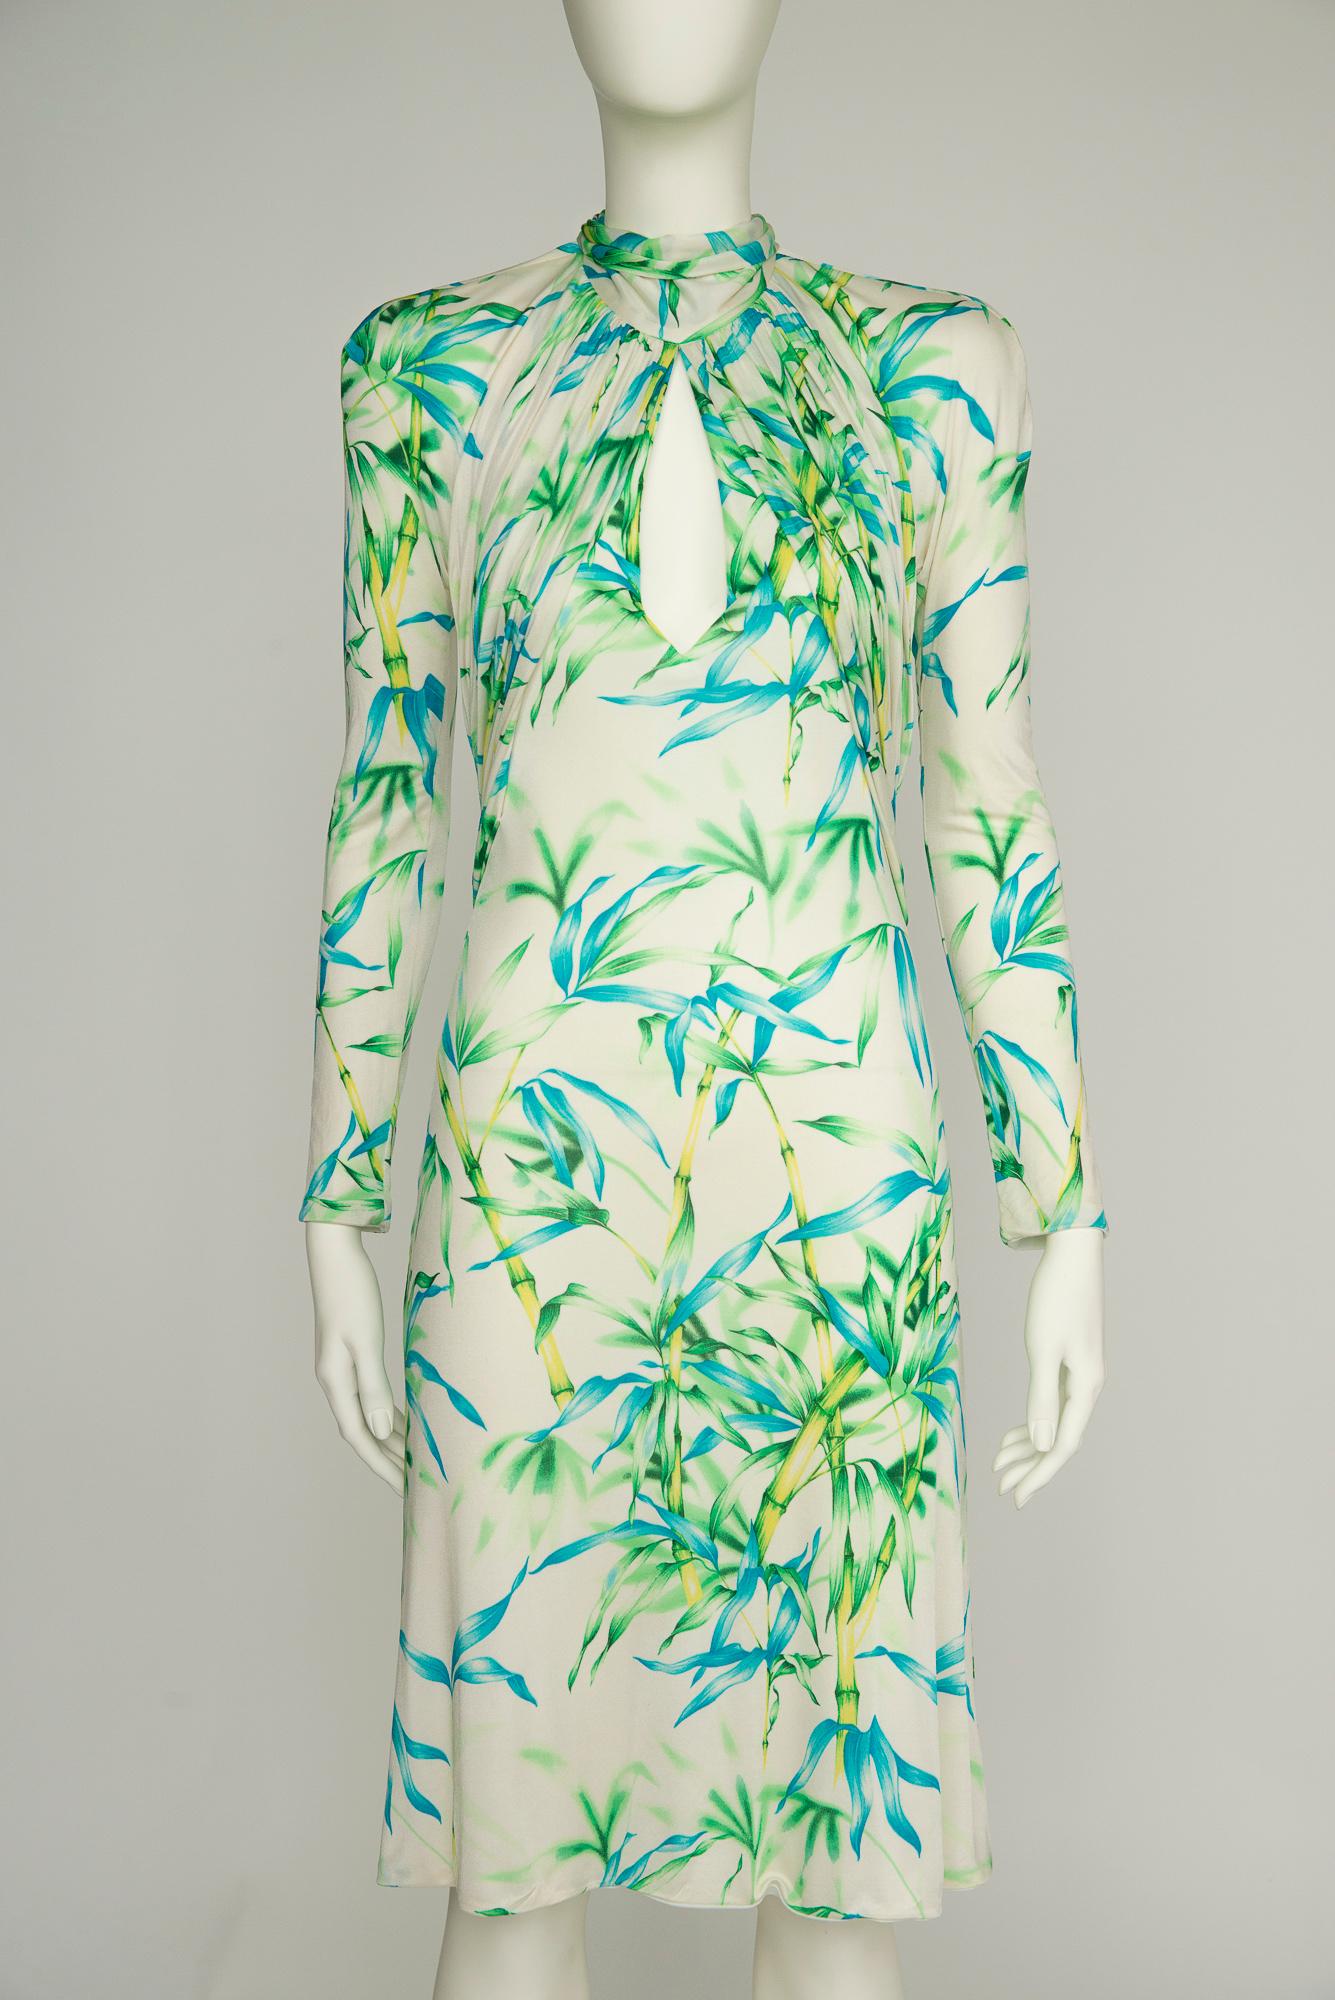 Women's Gianni Versace Couture Open-Back Tropical Print Runway Silk Jersey Dress, SS2000 For Sale